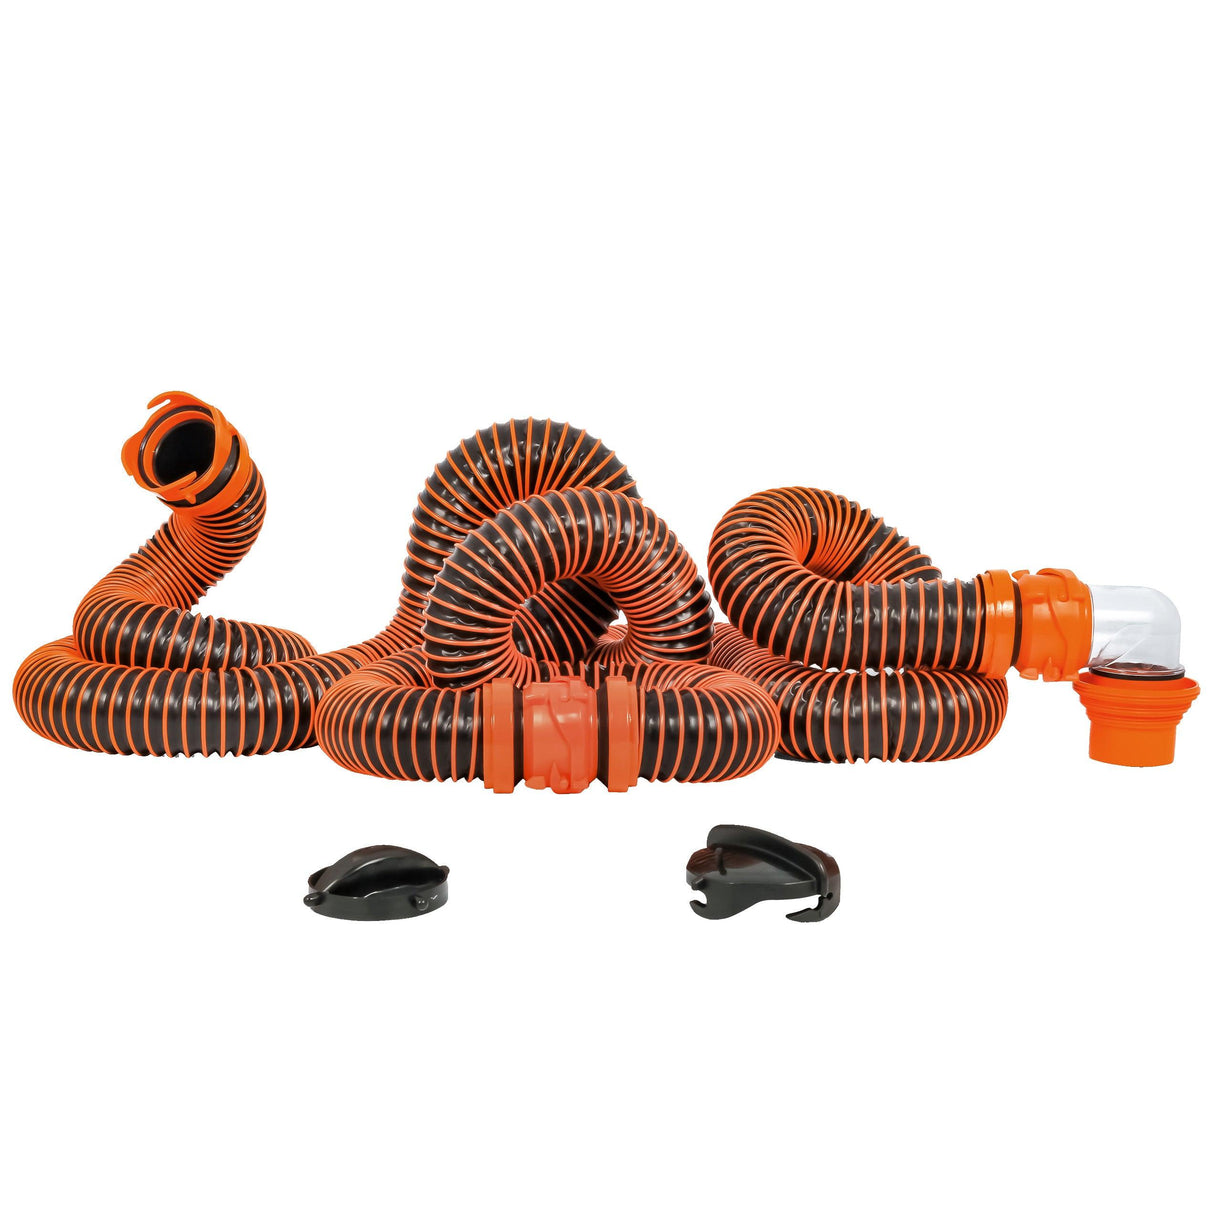 Camco RhinoEXTREME 20' Sewer Hose Kit w/4 In 1 Elbow Caps - Kesper Supply